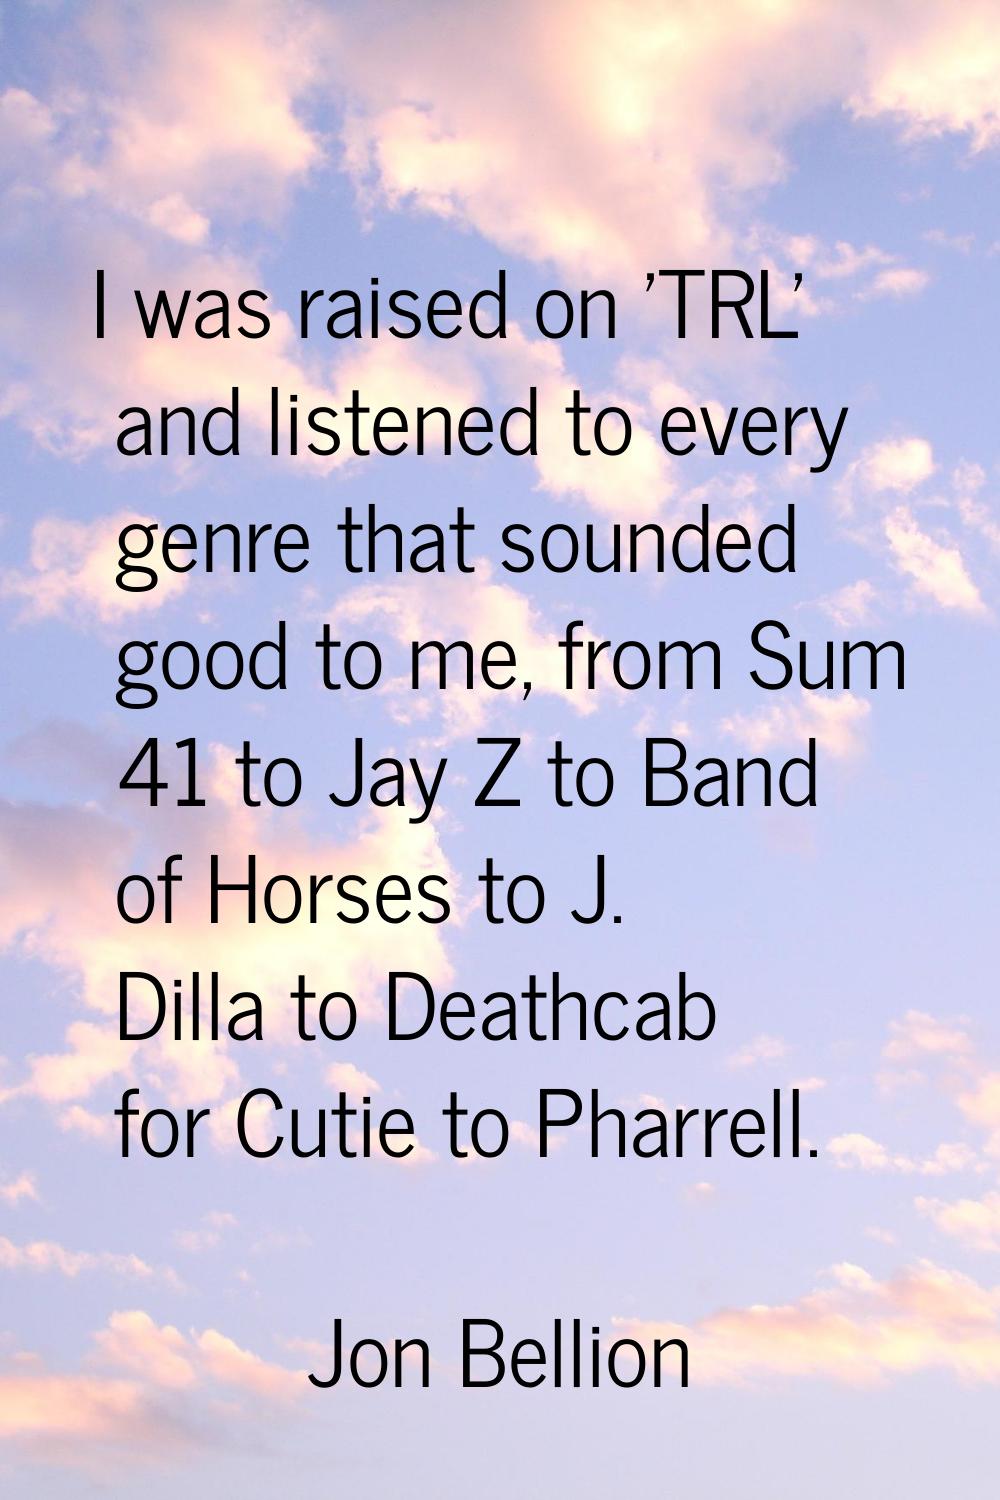 I was raised on 'TRL' and listened to every genre that sounded good to me, from Sum 41 to Jay Z to 